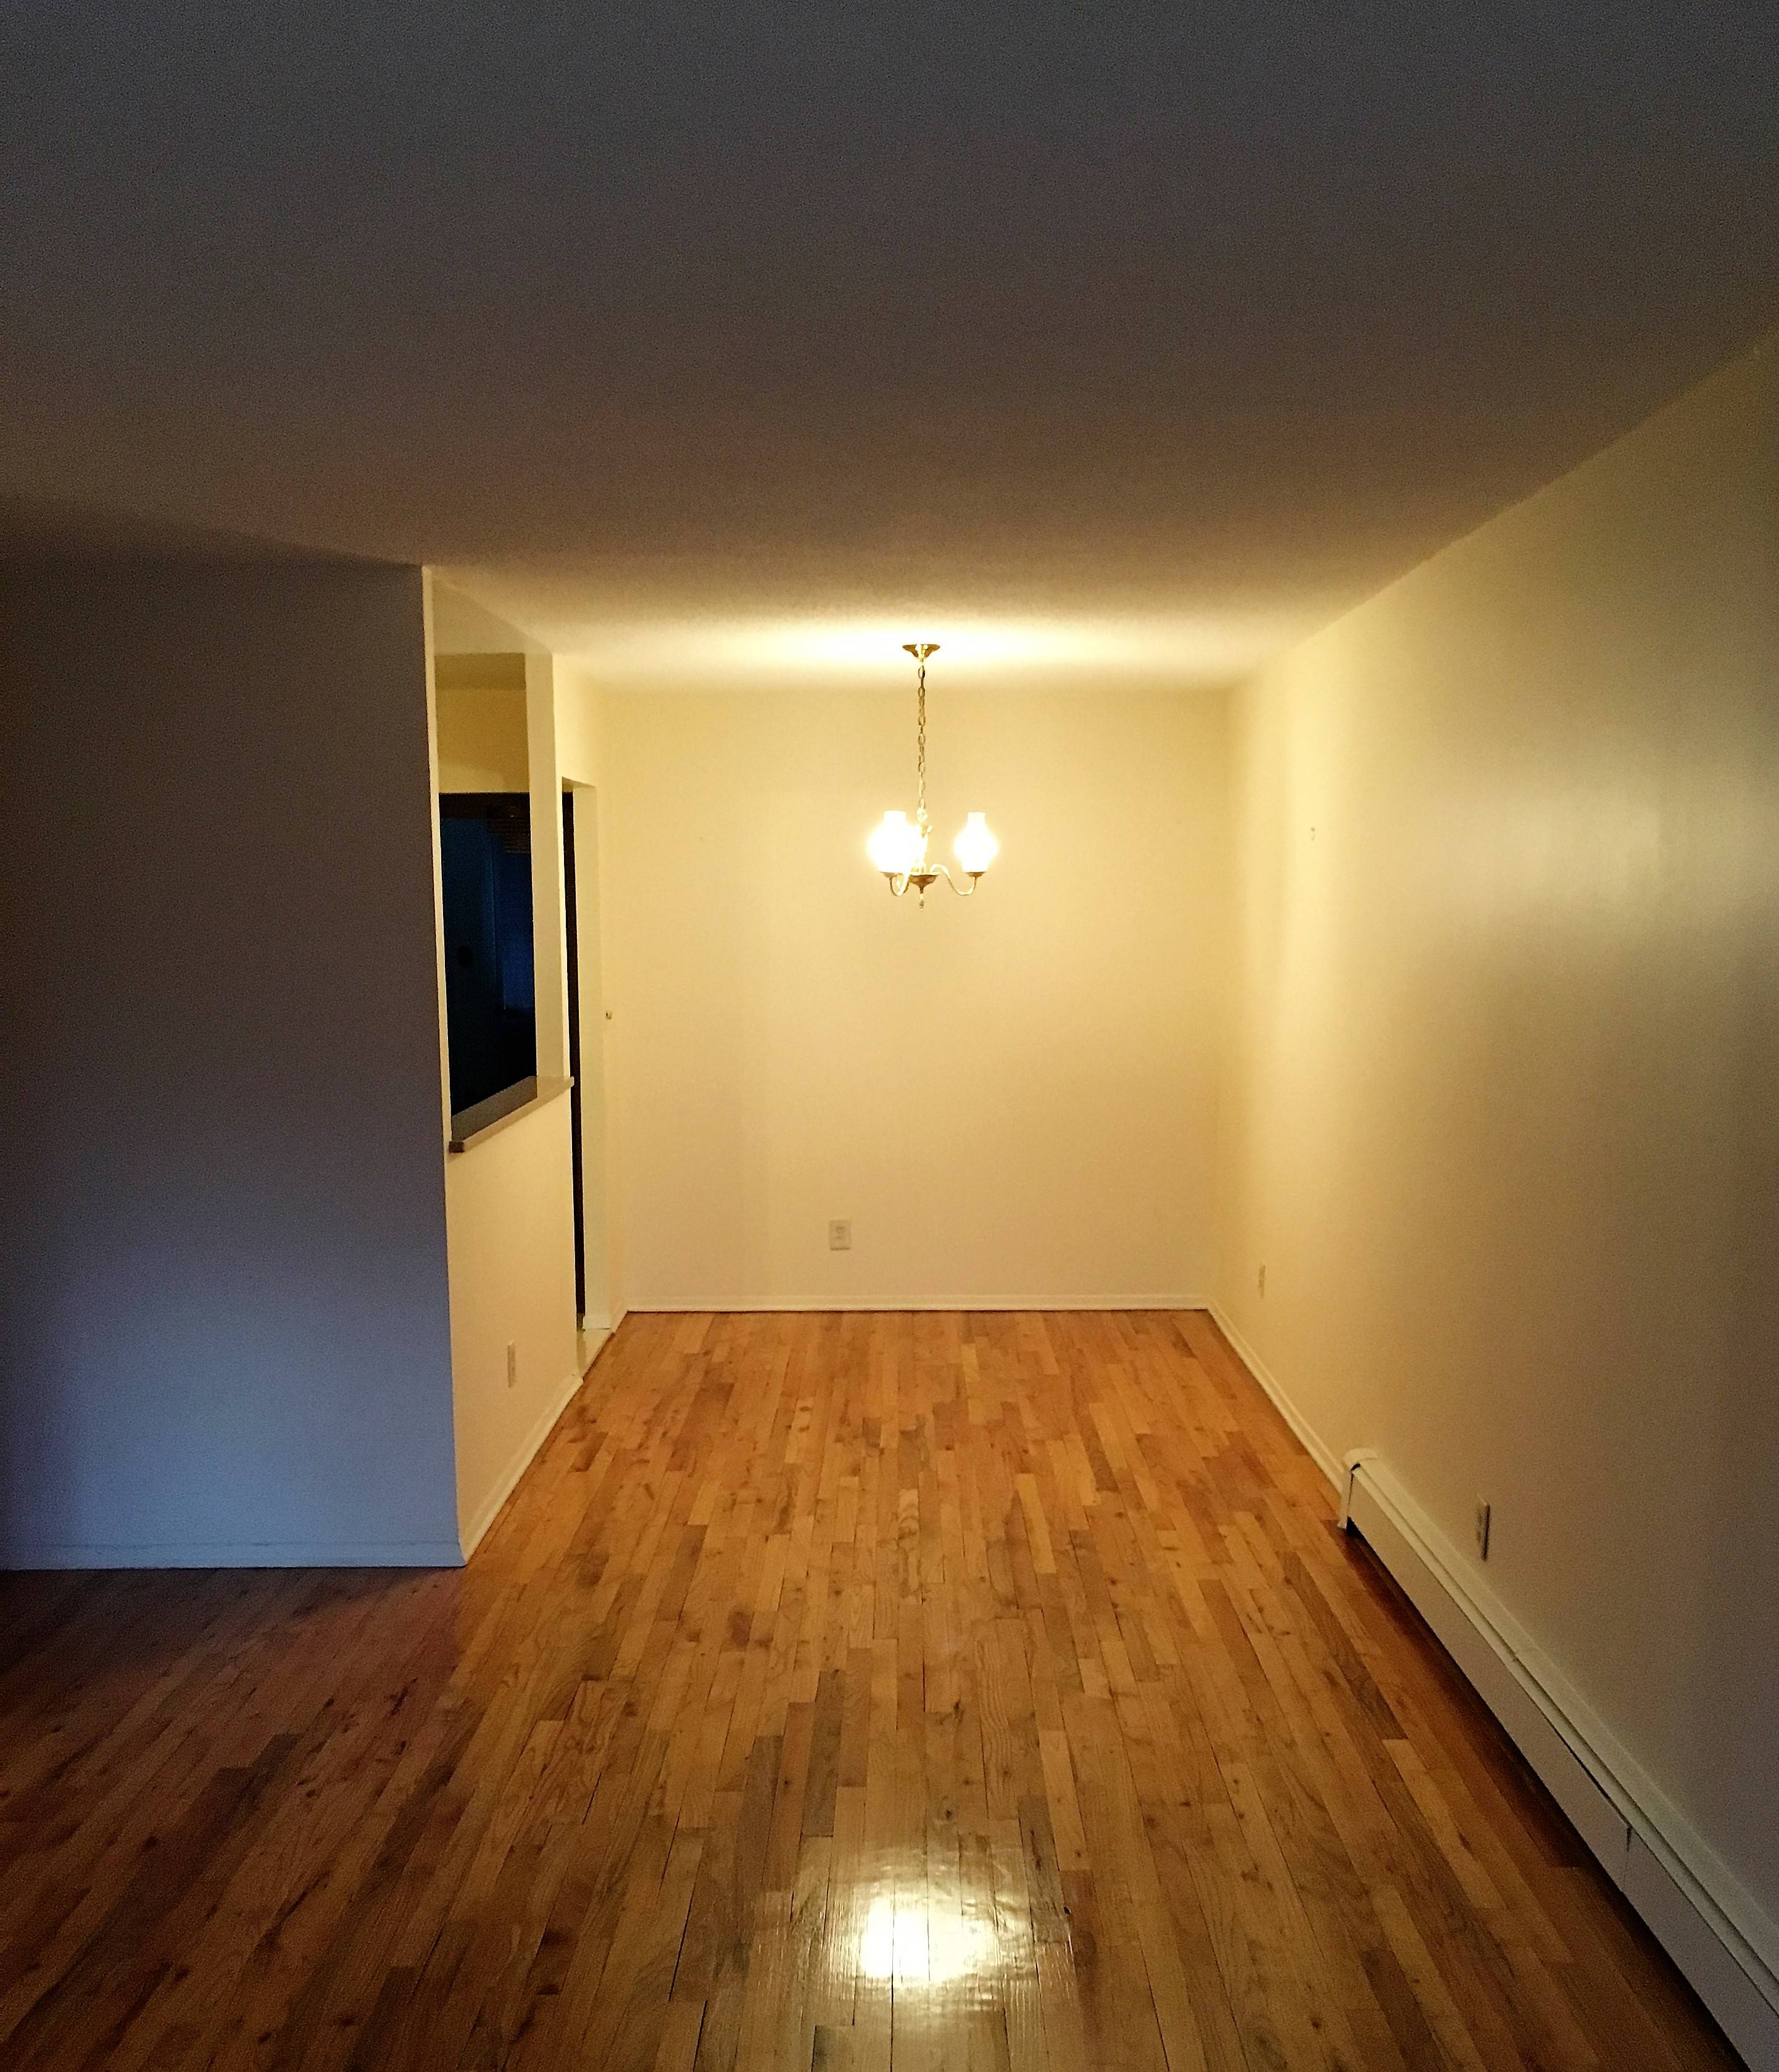 3 BEDROOM APARTMENT IN WOODSIDE FREE HEAT HOTWATER AND COOKING GAS/BACKYARD INLCUDED